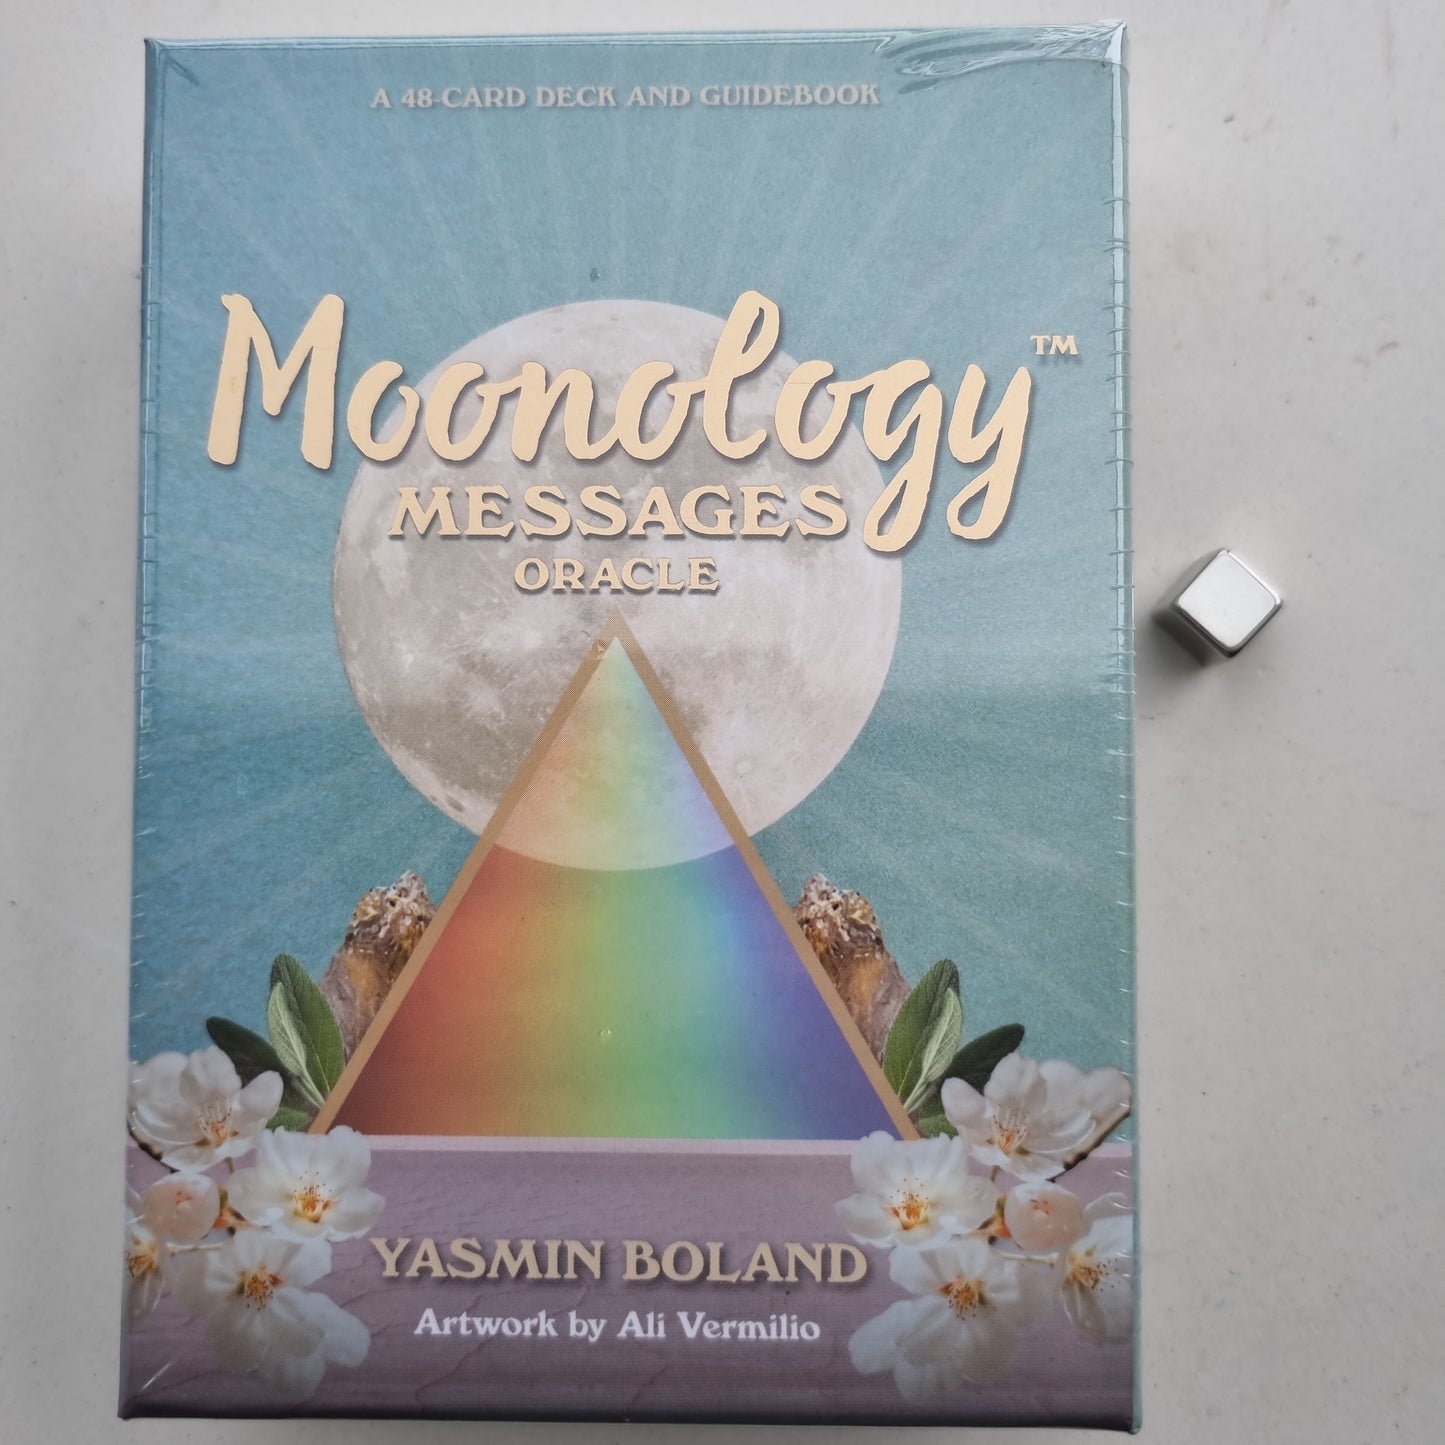 Moonology messages Oracle